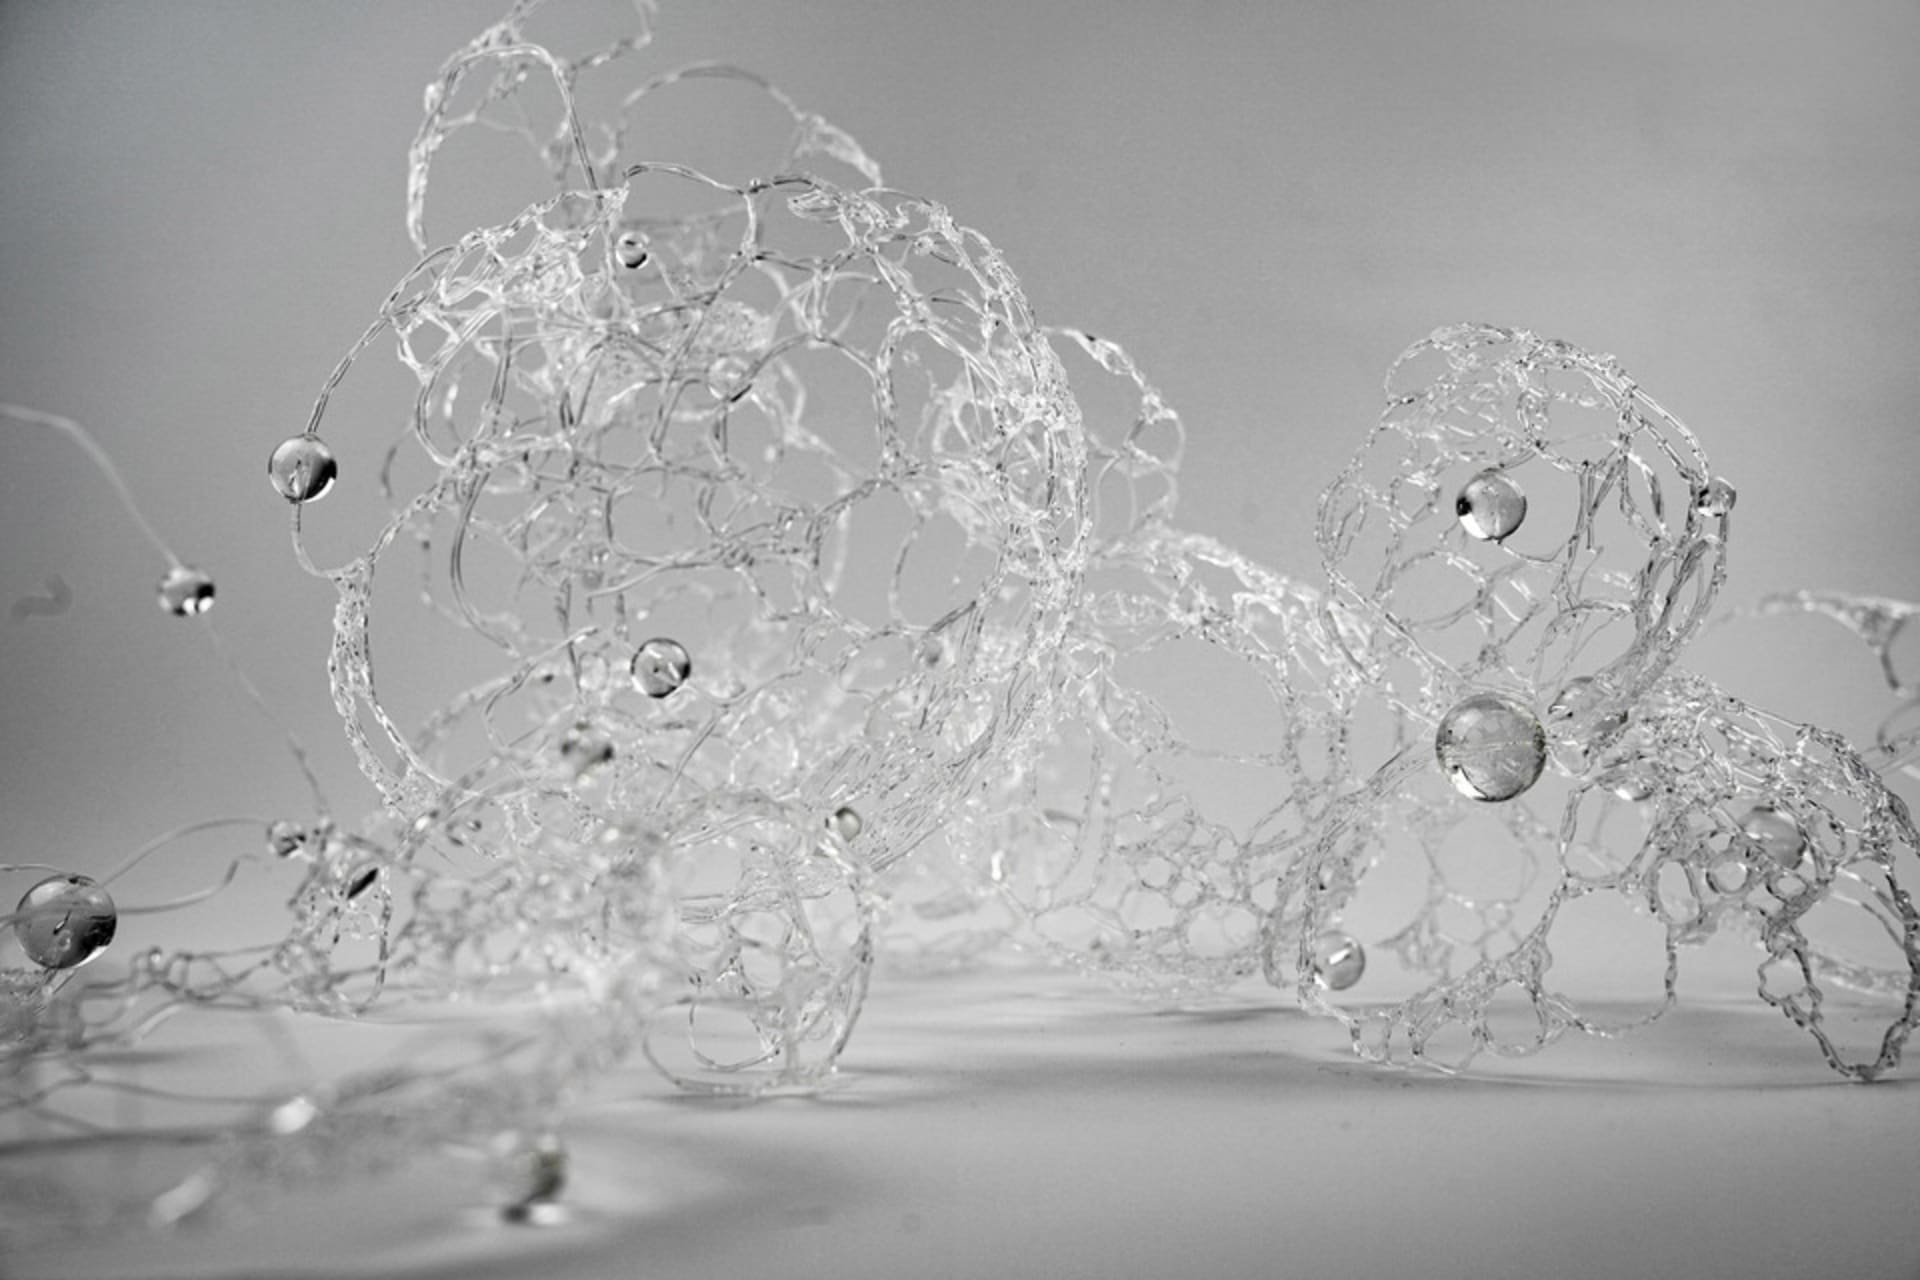 Use clear PLA to draw bubble gaps, make it into broken bubbles and string some glass beads. Reflect the sense of fleetingness.